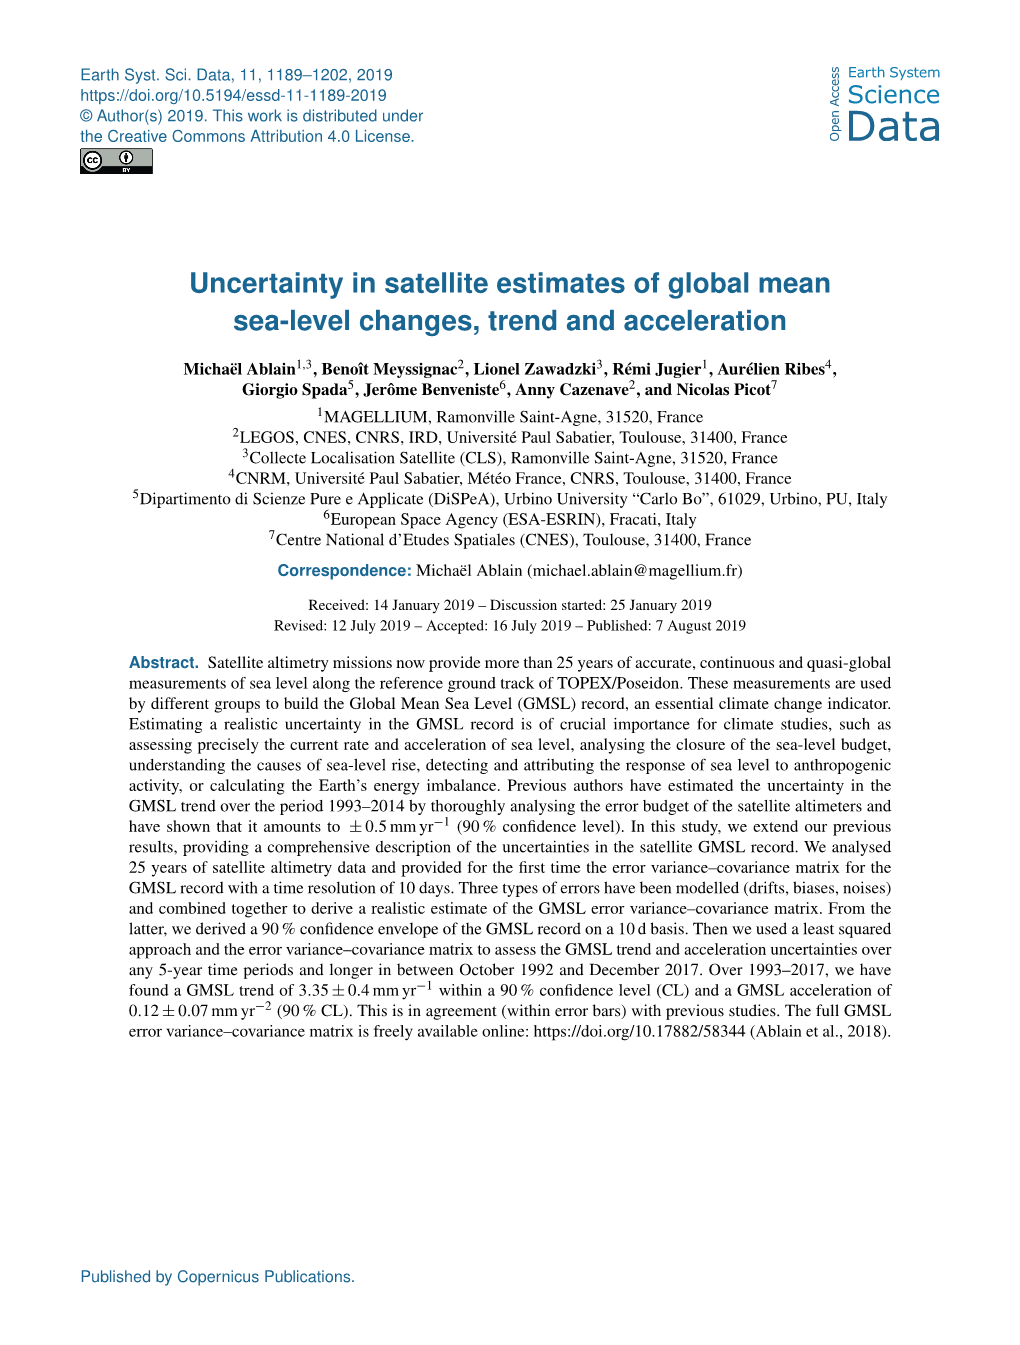 Uncertainty in Satellite Estimates of Global Mean Sea-Level Changes, Trend and Acceleration